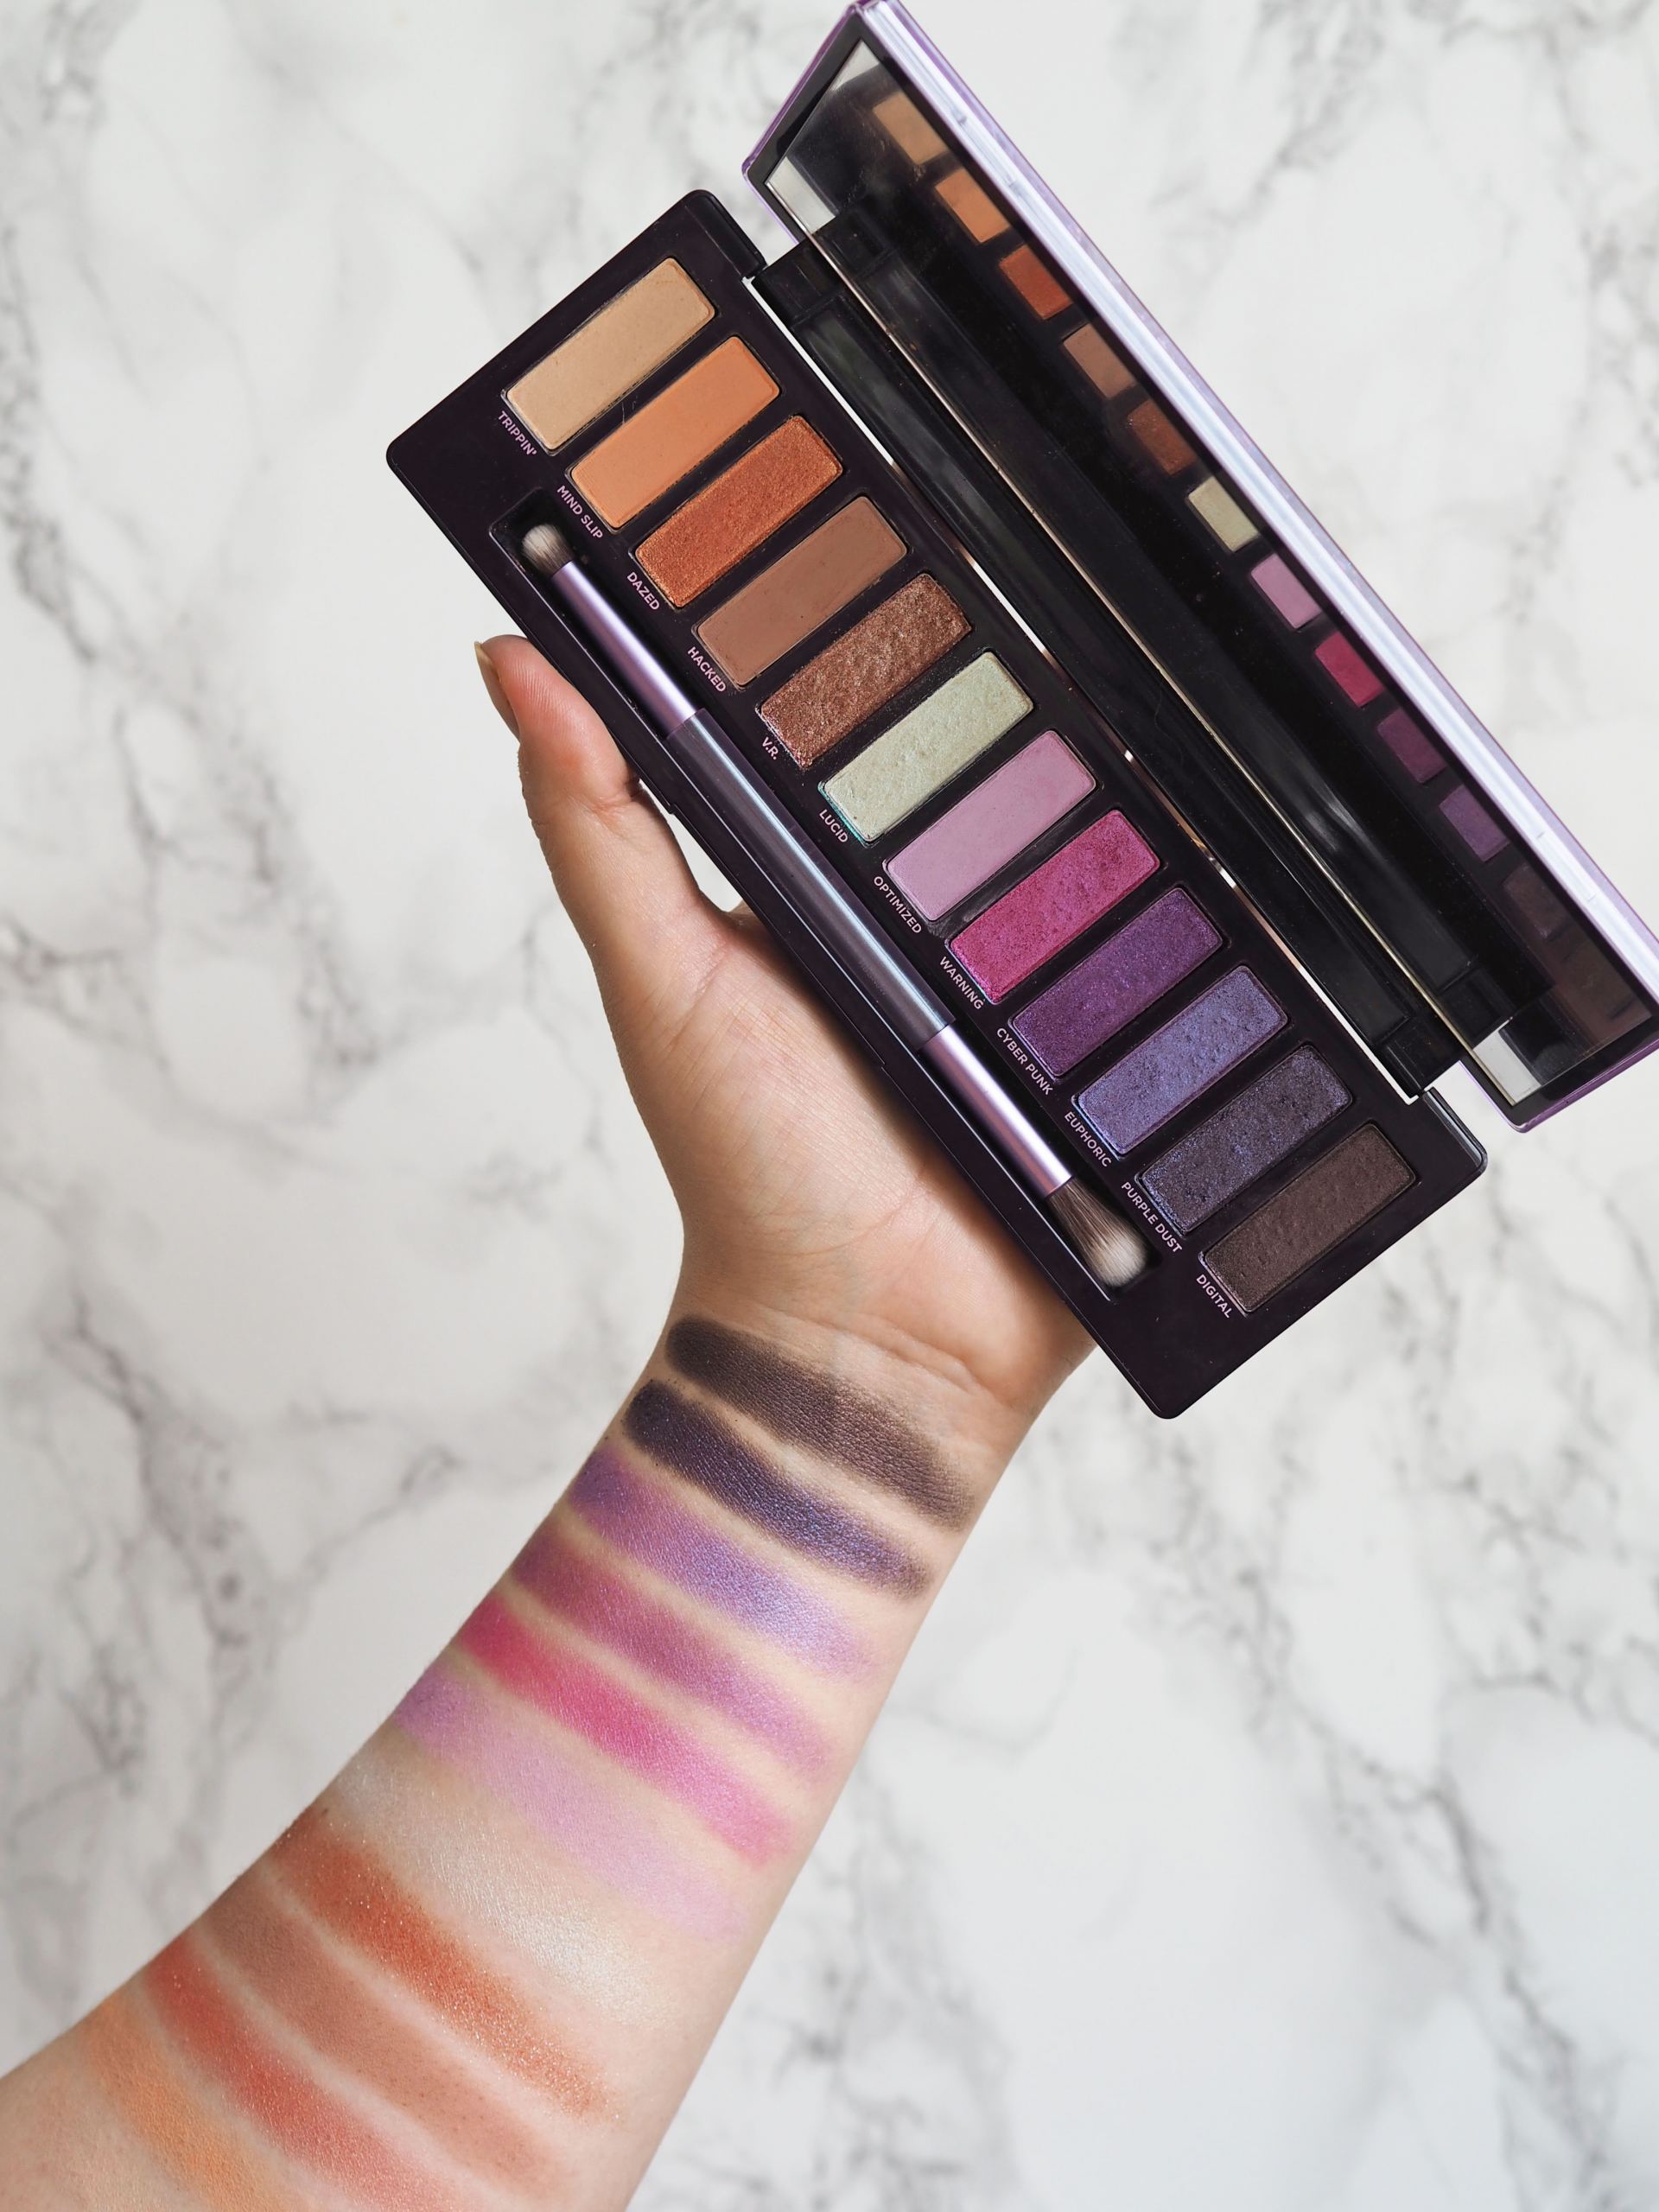 Urban Decay Naked Reloaded Palette Review + Swatches - A 